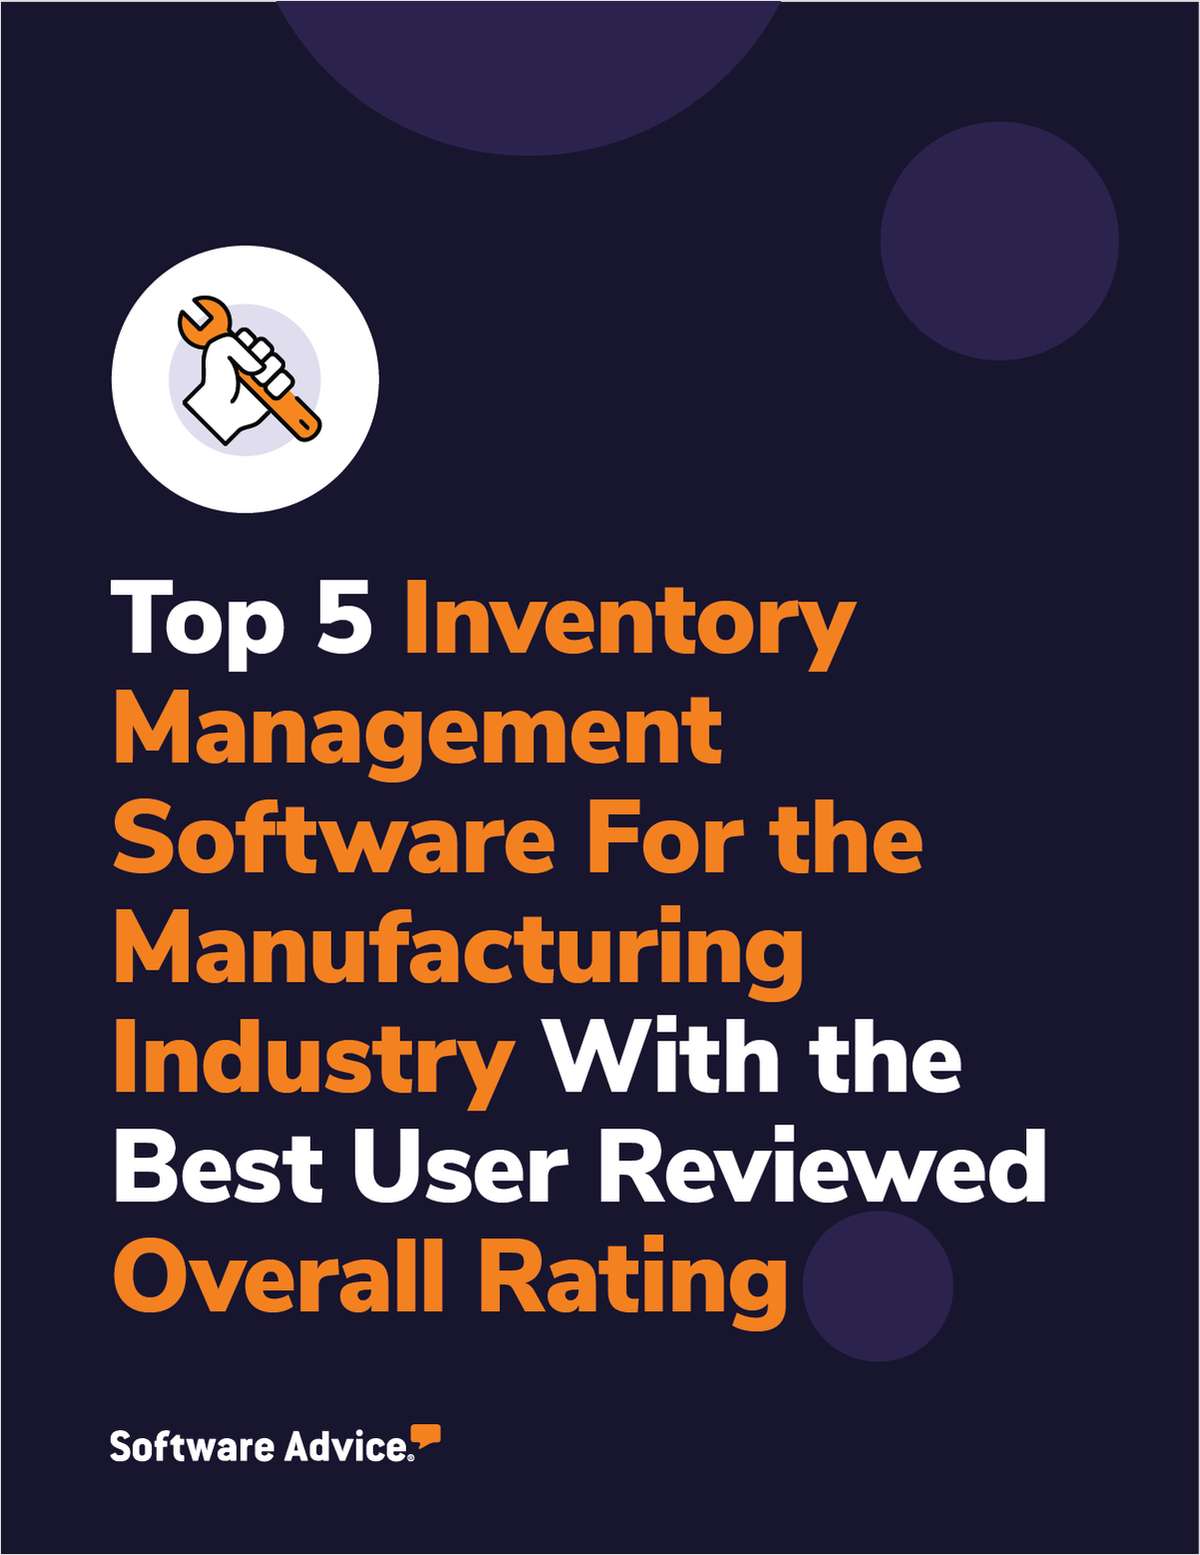 Top 5 Inventory Management Software For the Manufacturing Industry With the Best User-Reviewed Overall Rating